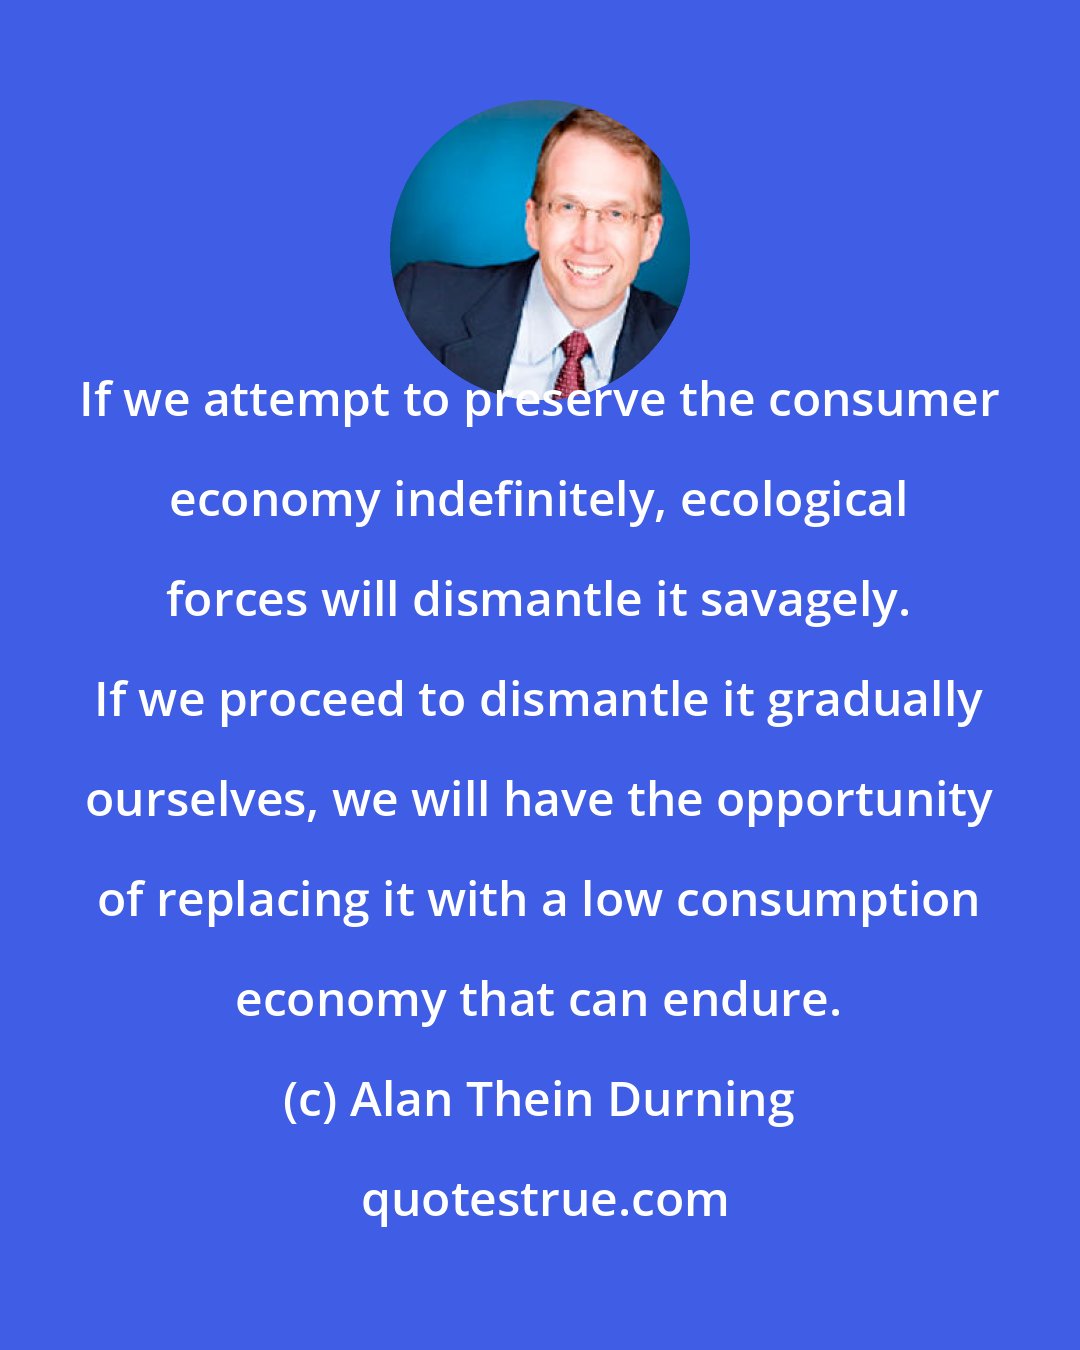 Alan Thein Durning: If we attempt to preserve the consumer economy indefinitely, ecological forces will dismantle it savagely. If we proceed to dismantle it gradually ourselves, we will have the opportunity of replacing it with a low consumption economy that can endure.